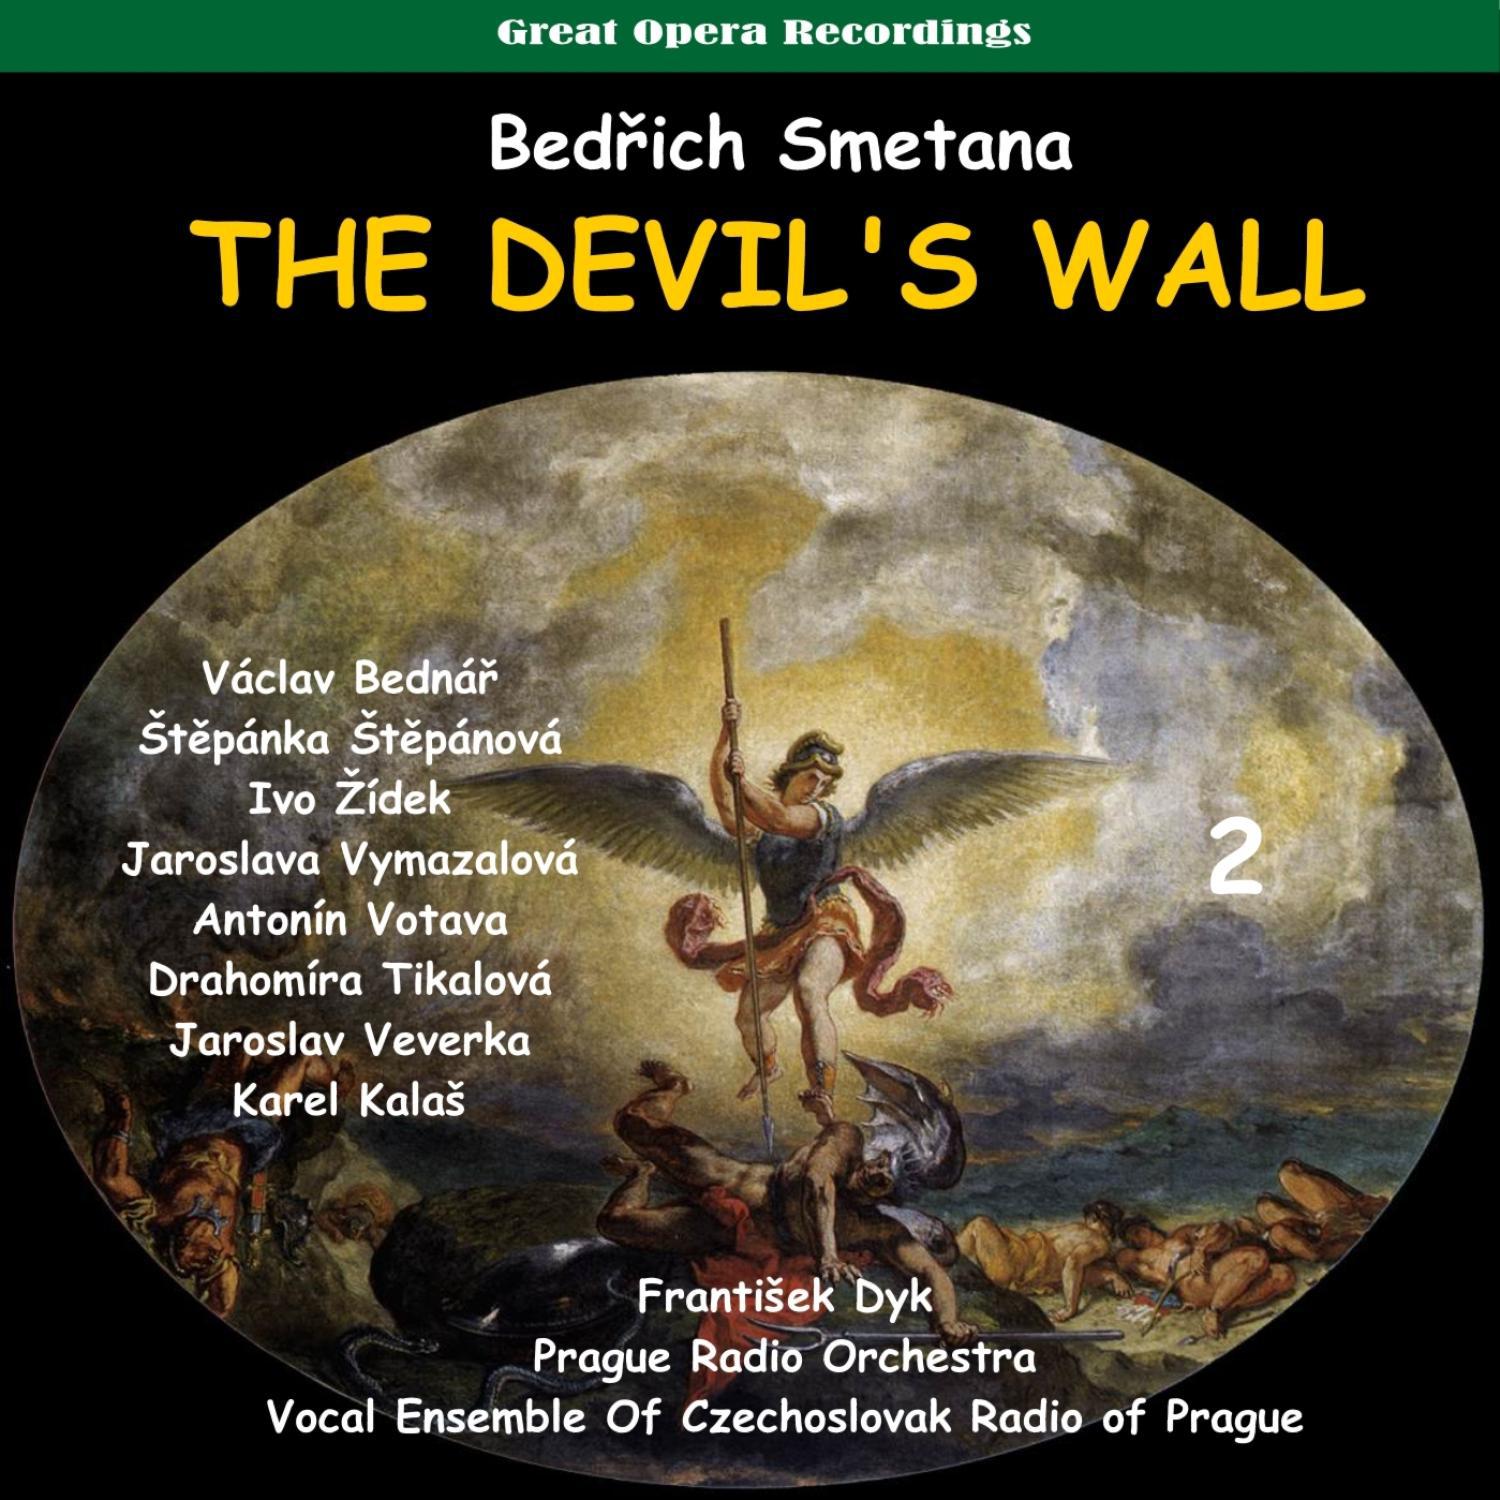 The Devil's Wall: Act IIb